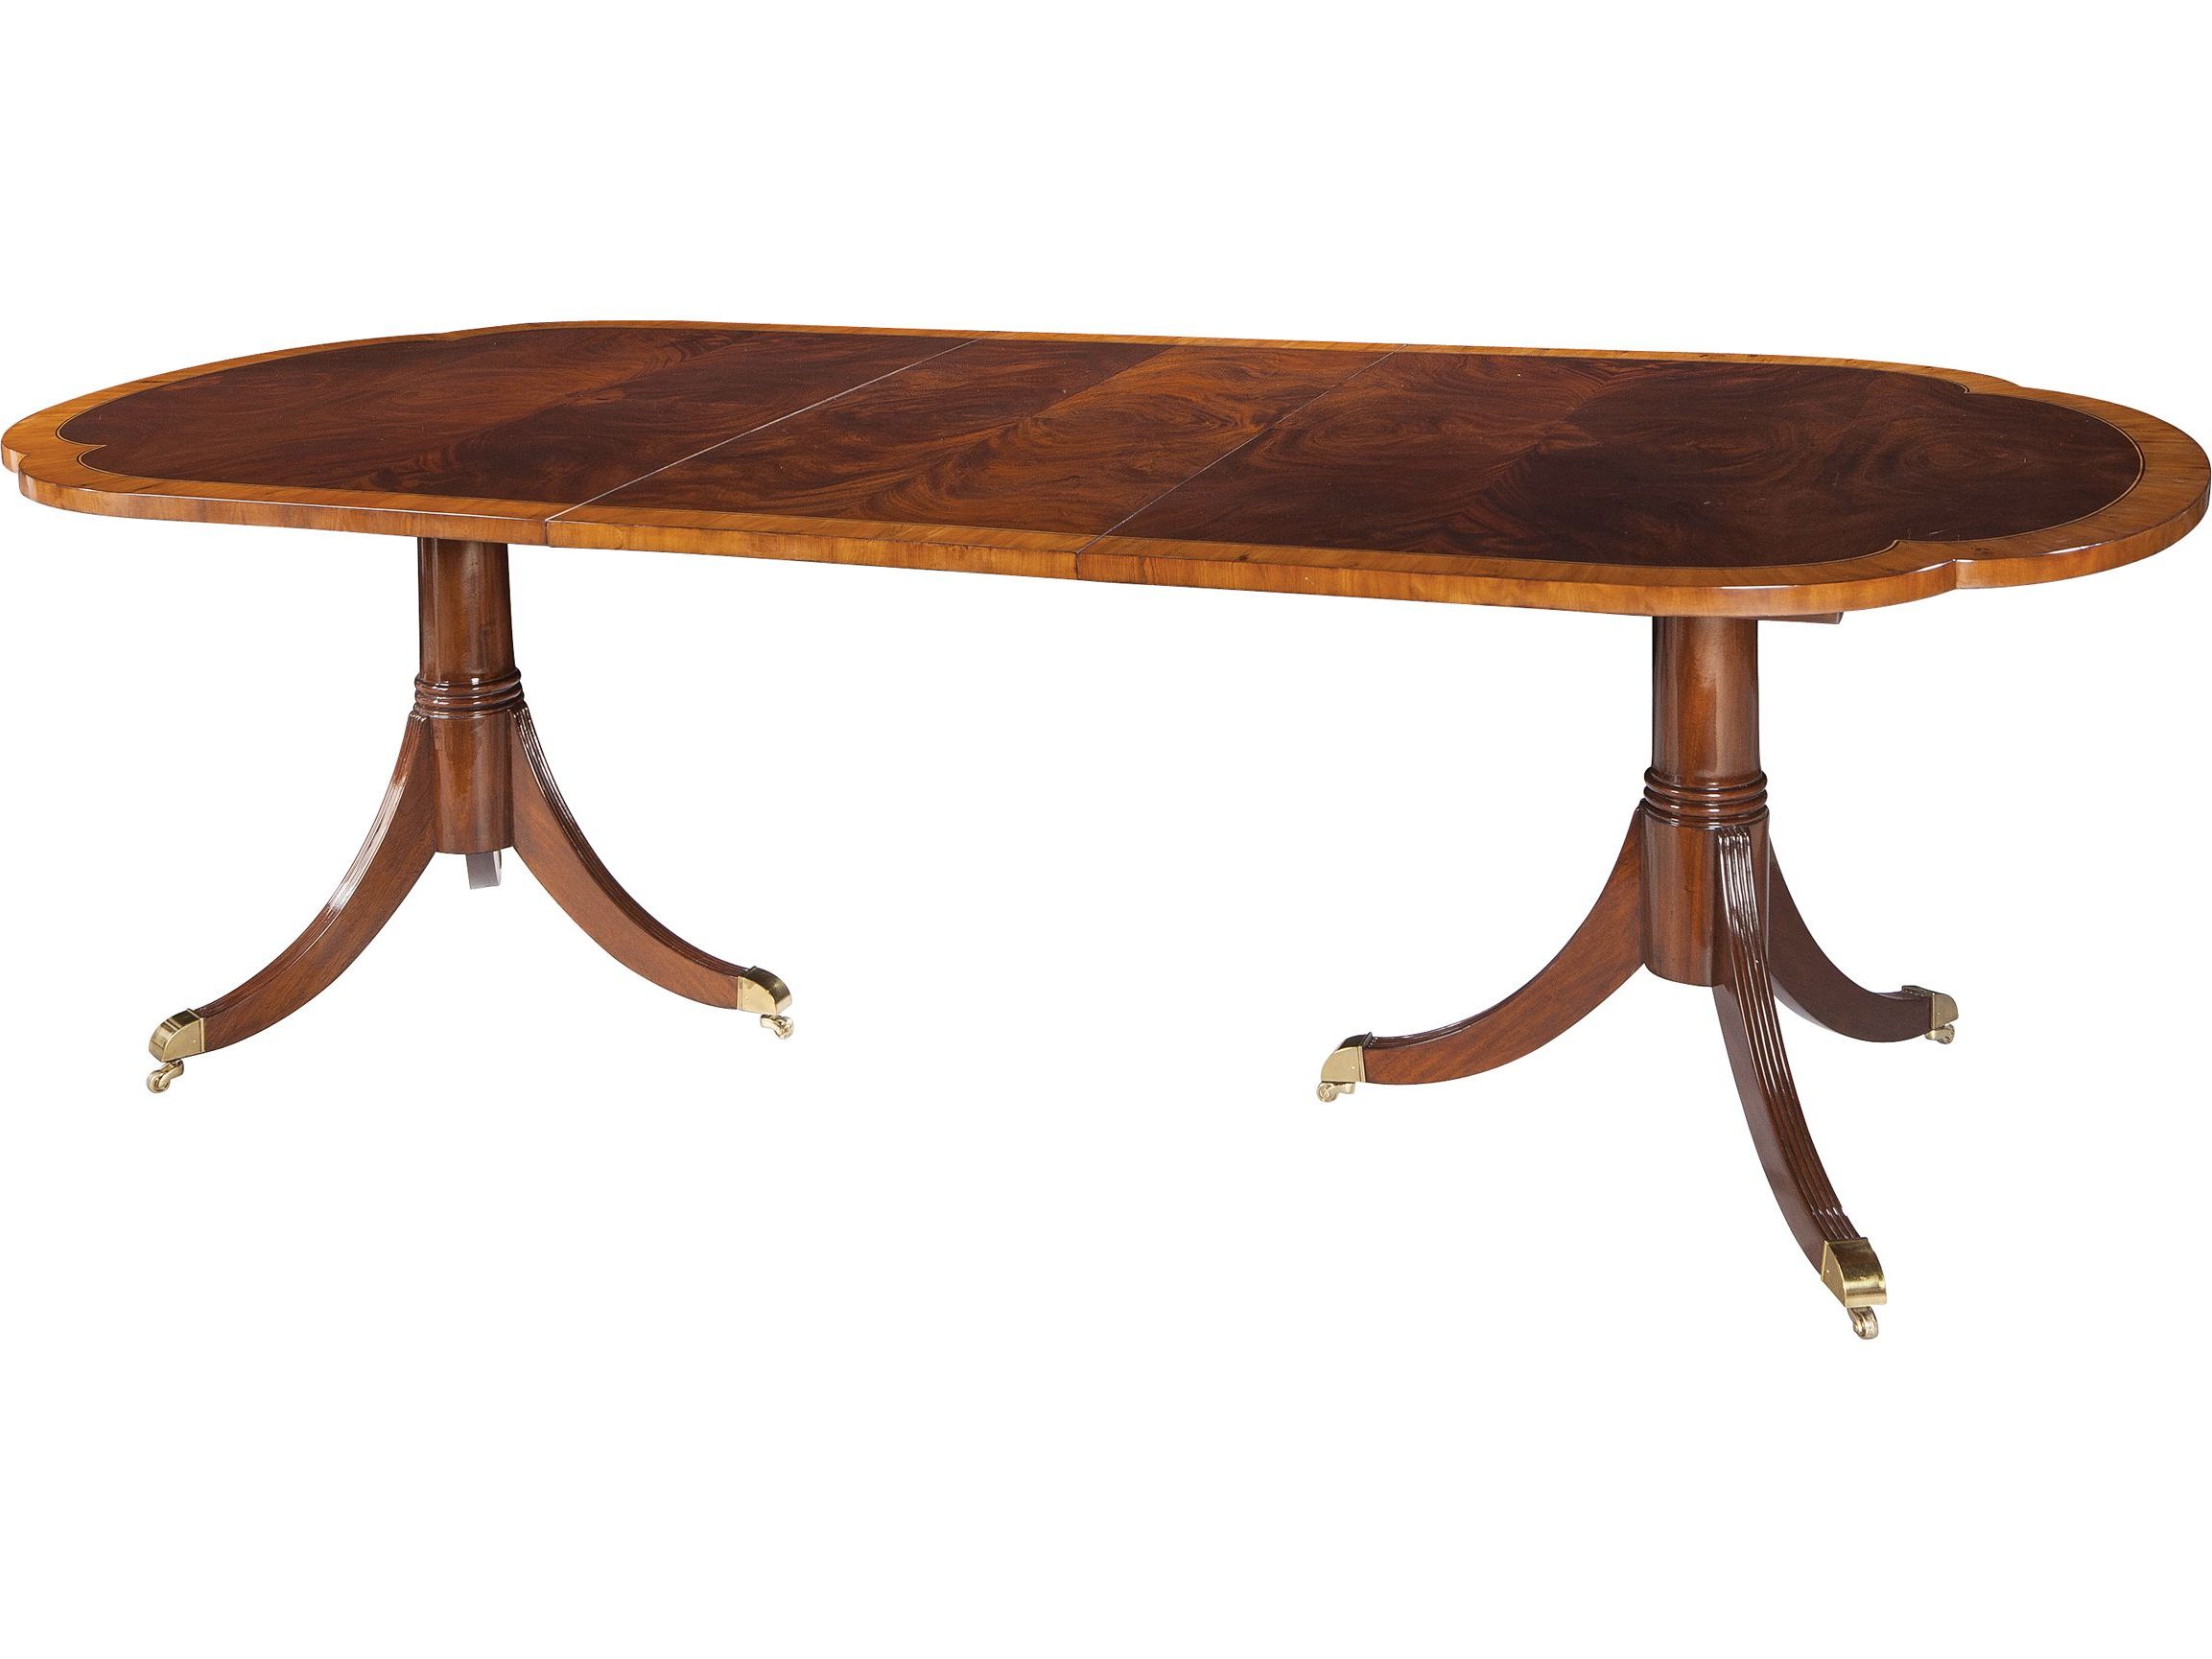 Hekman Copley Place Double Pedestal 76'' X 46'' Oval Throughout 2019 Canalou 46'' Pedestal Dining Tables (Gallery 1 of 20)